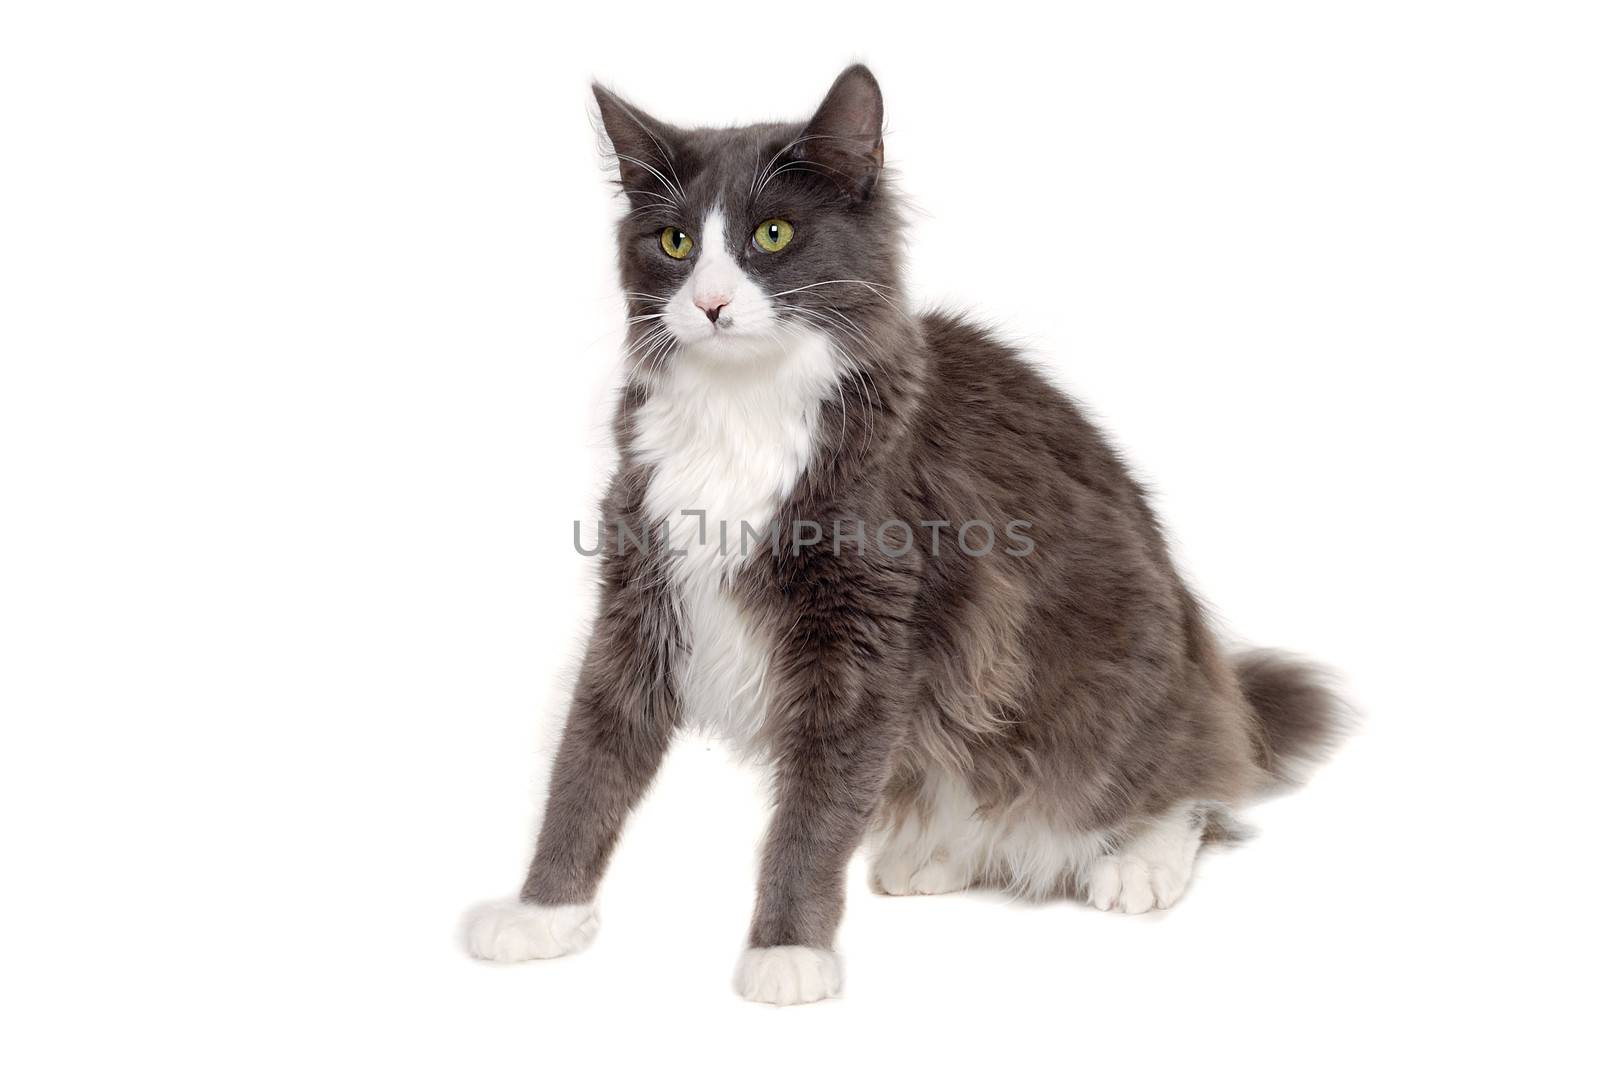 Gray cat sitting on a clean white background by cfoto